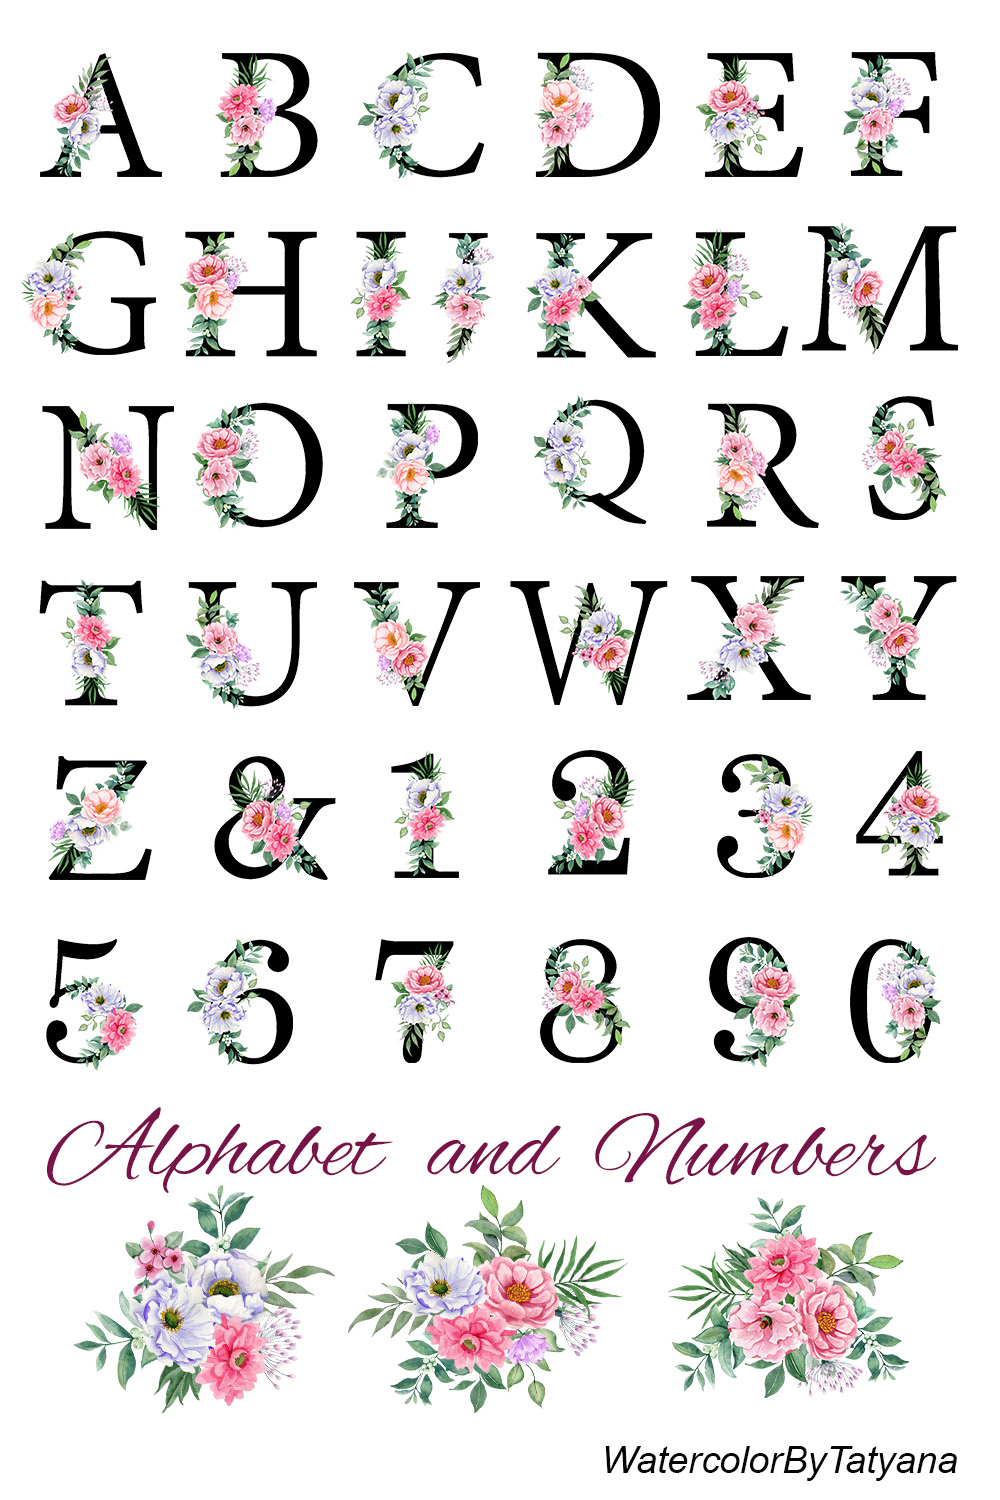 Alphabet with Watercolor Flowers, Letters, Monogram, Numbers facebook image.